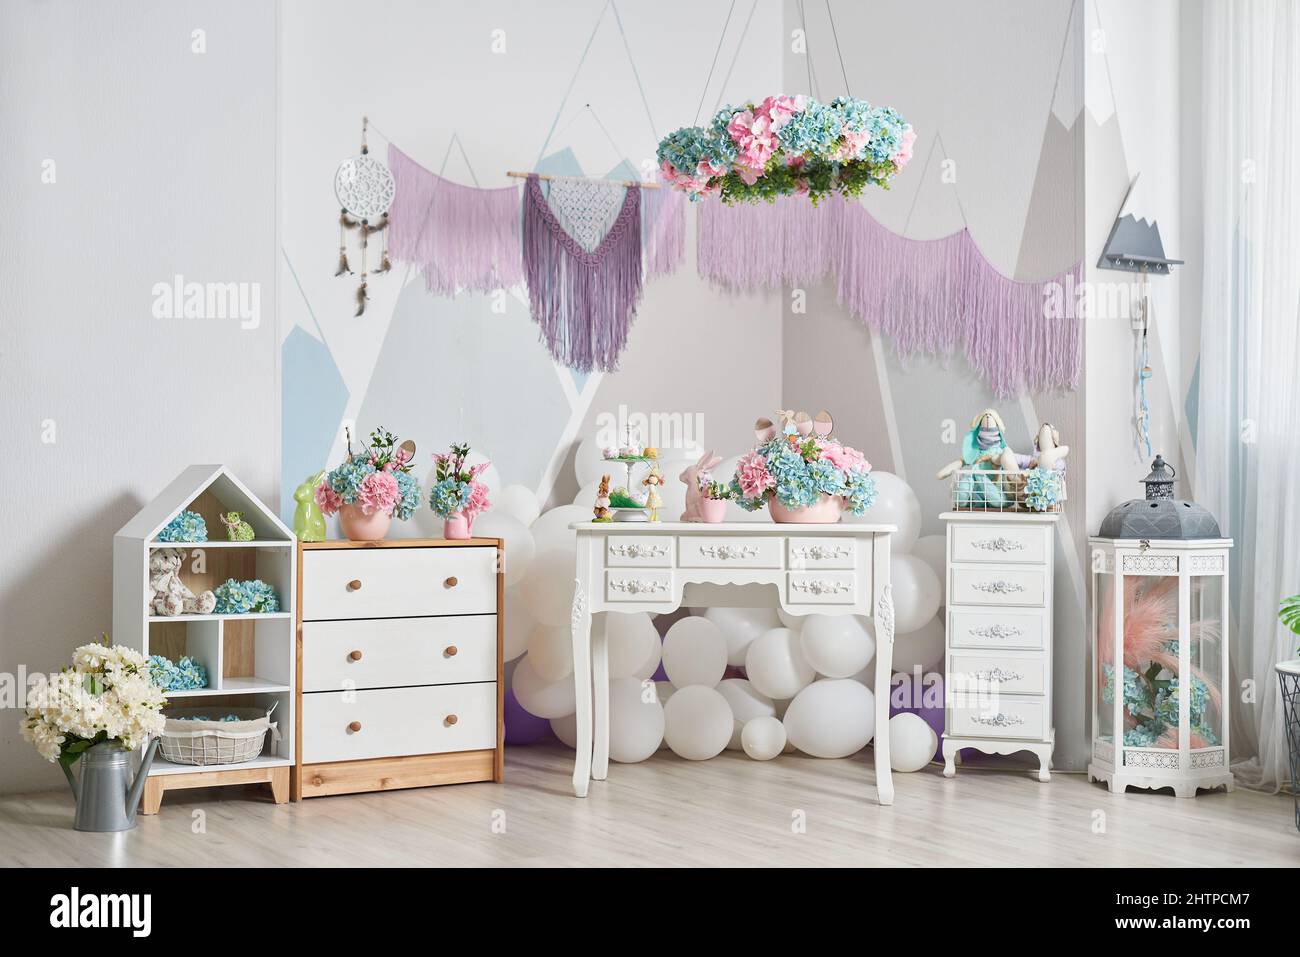 Kids interior with Easter decorations, toys and flowers Stock Photo